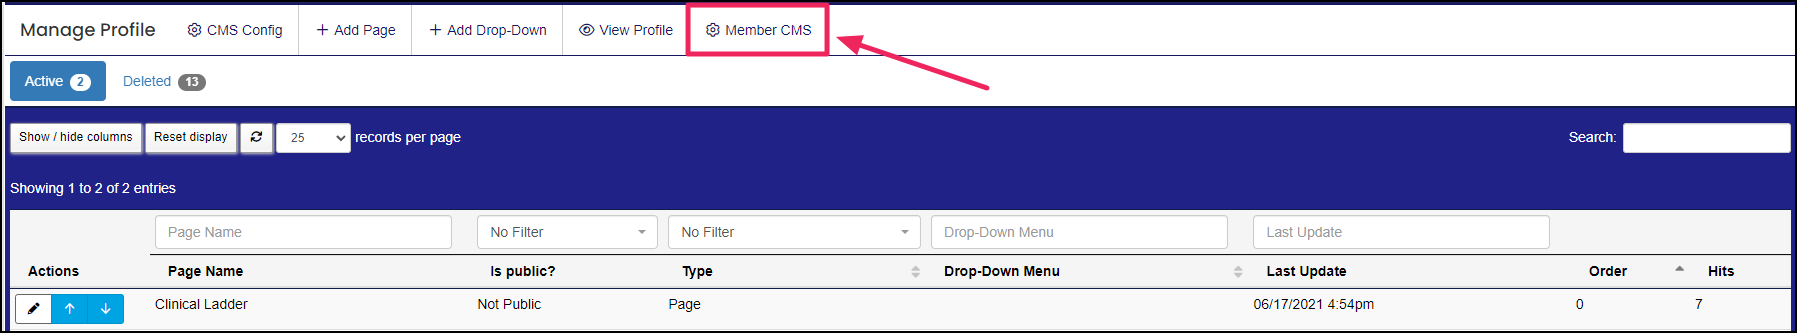 Image shows manage profile page with arrow pointing to Member CMS button.